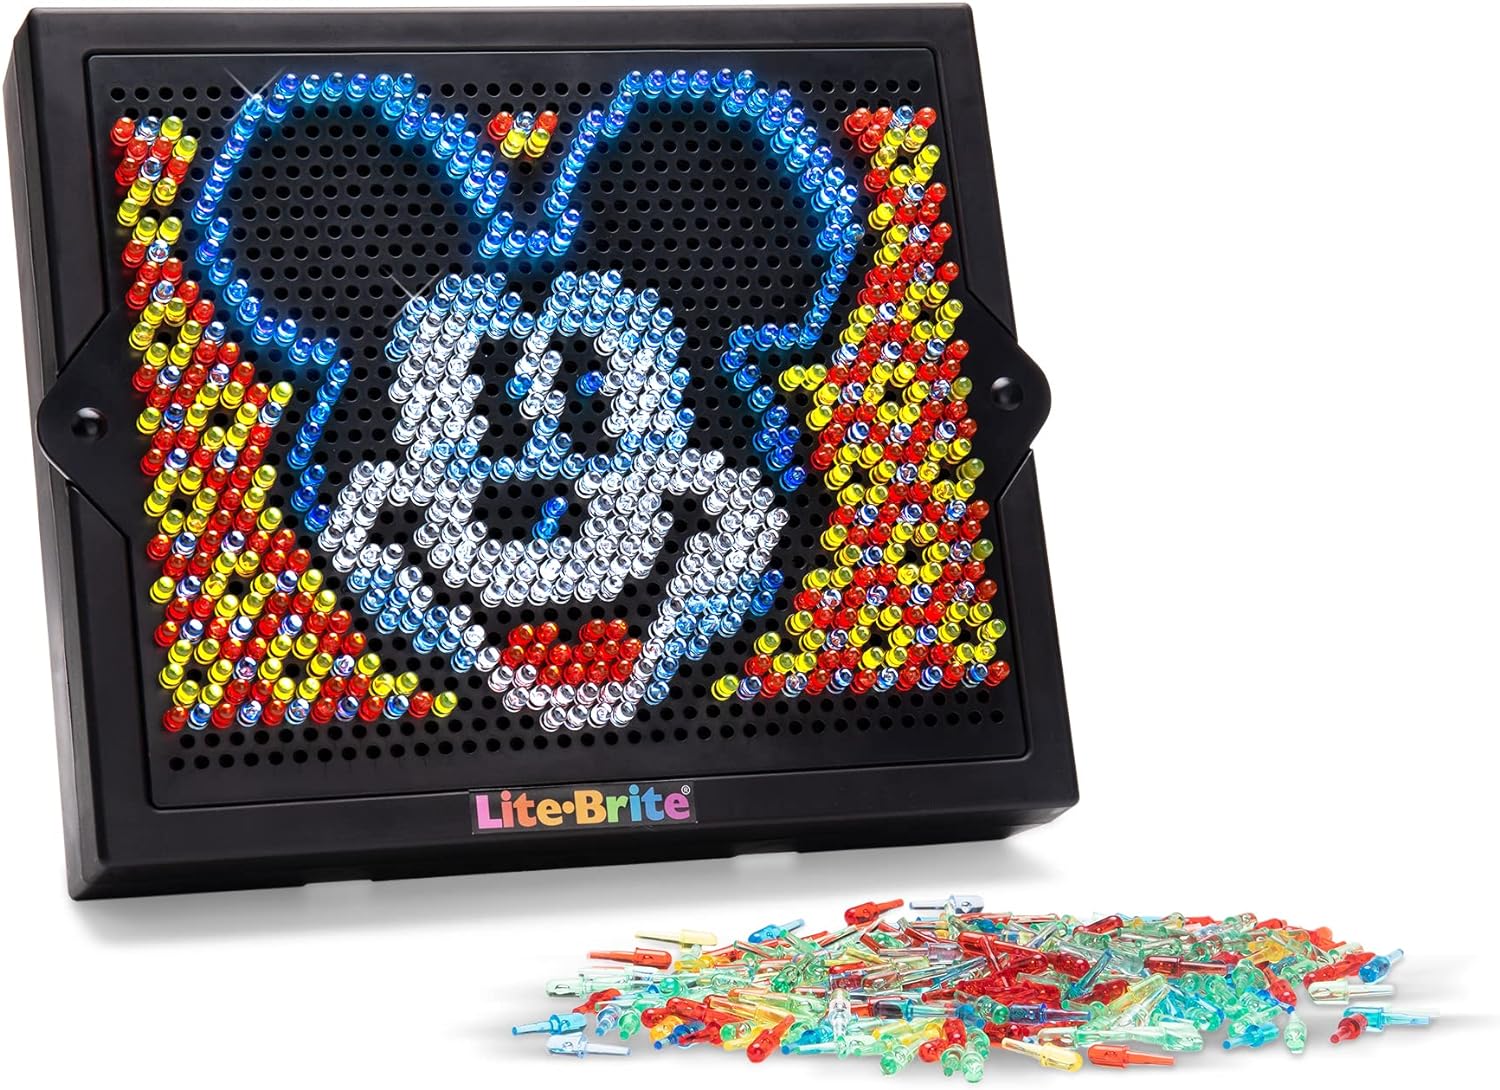 Lite-Brite Super Bright HD - Disney 100 Years of Wonder Edition Educational Play for Children – Enhances Creativity & Fine Motor Skills, Gift for Boys and Girls Ages 6+